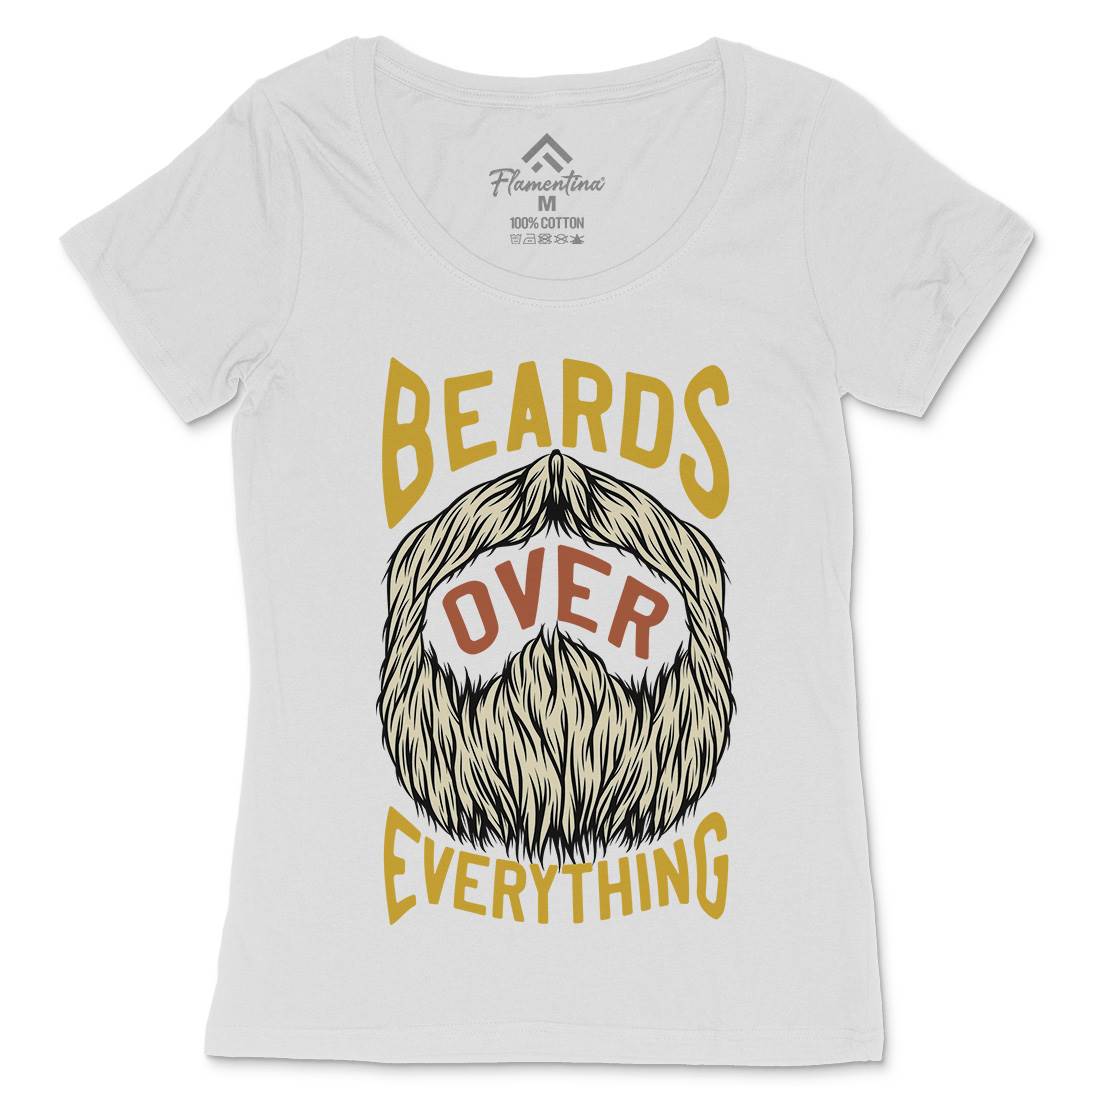 Beards Over Everything Womens Scoop Neck T-Shirt Barber C803